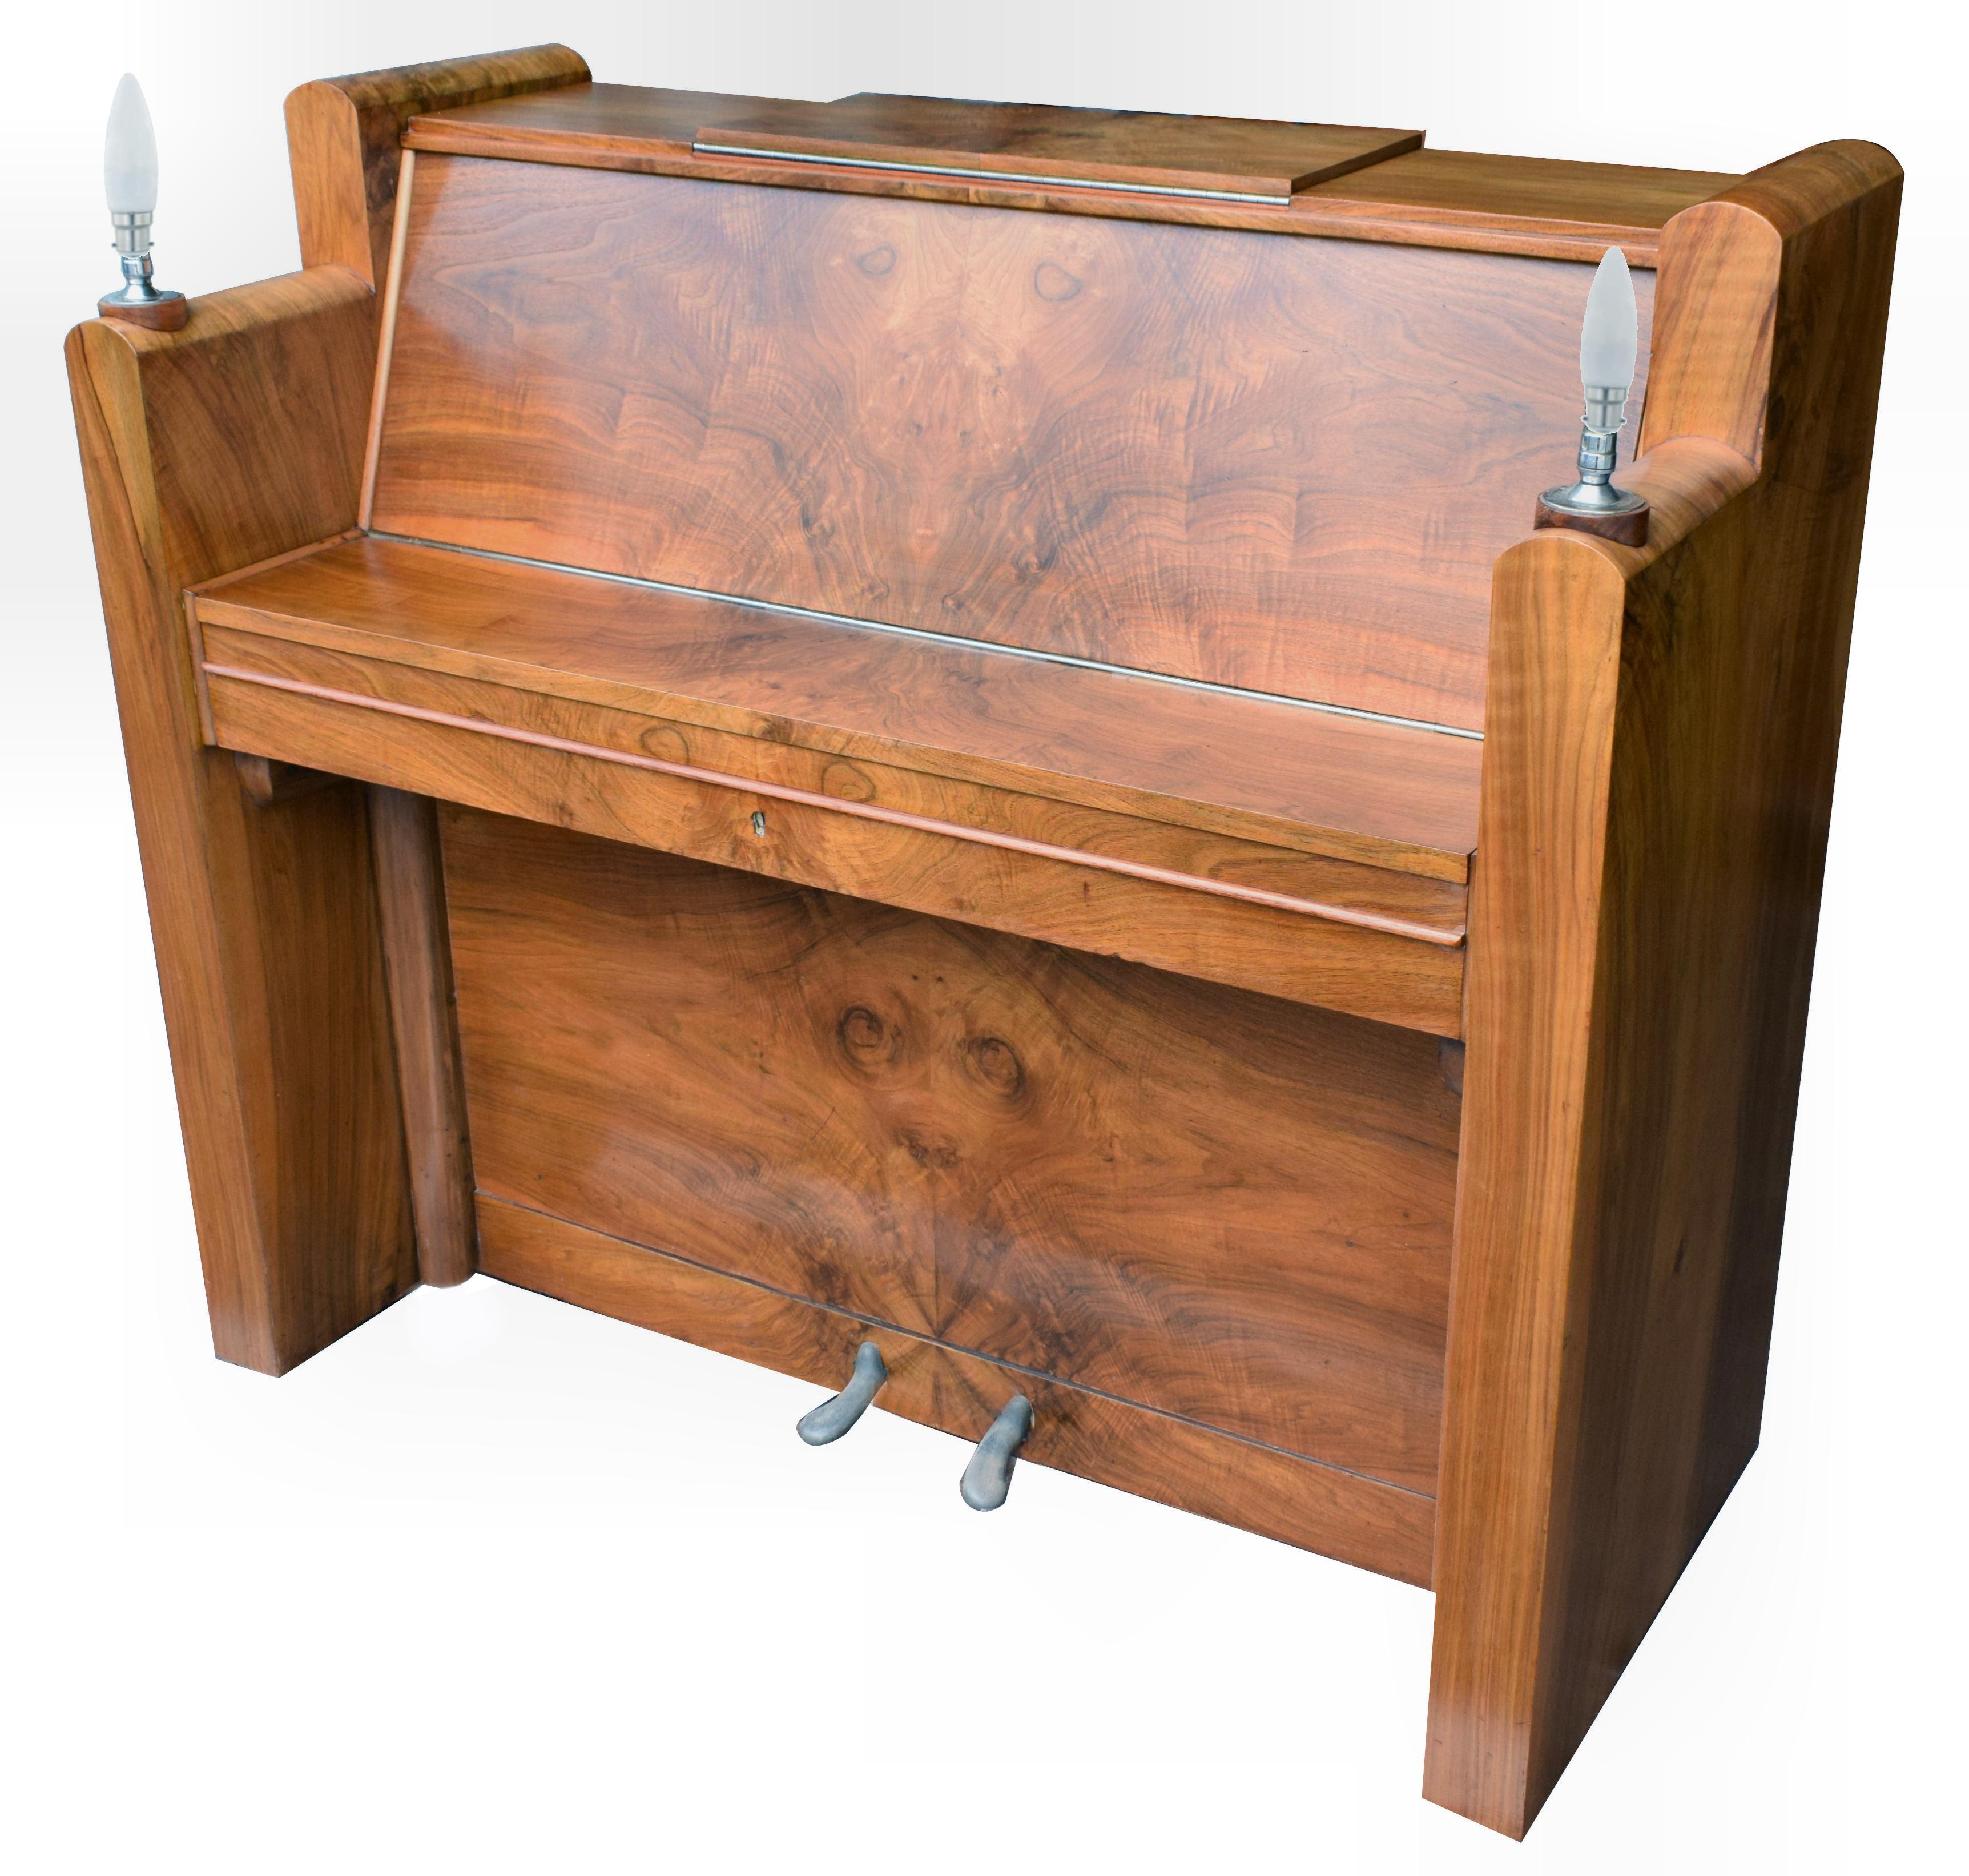 Stunning 1930s Iron framed Art Deco piano by Berry of London, England. This fabulous looking piano has been veneered in a heavily figured walnut. The whole piano, as you can see, has a brilliant, desirable Art Deco shape. All the keys are in good